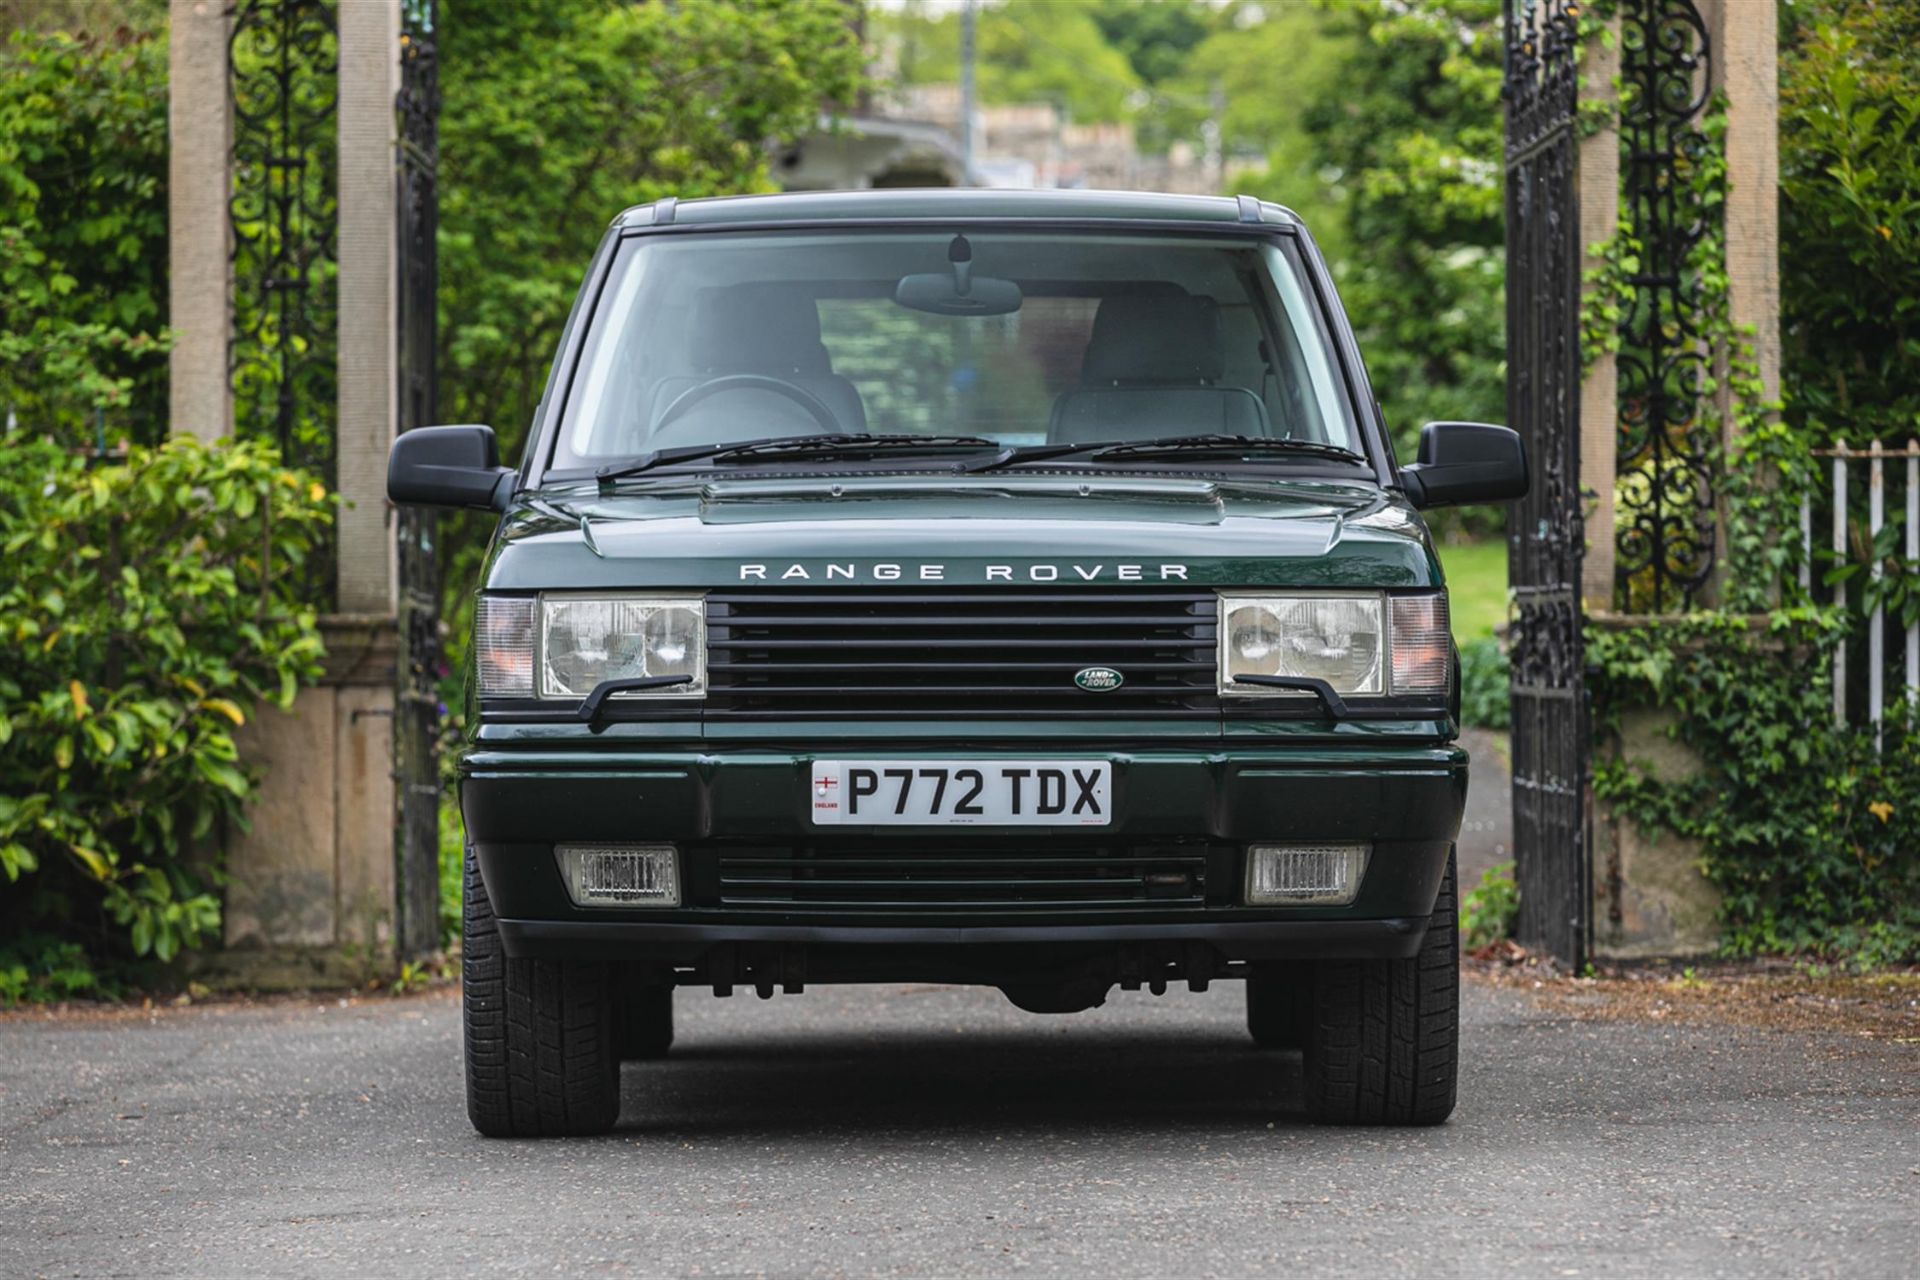 1996 Range Rover P38 4.6 HSE - Image 6 of 10